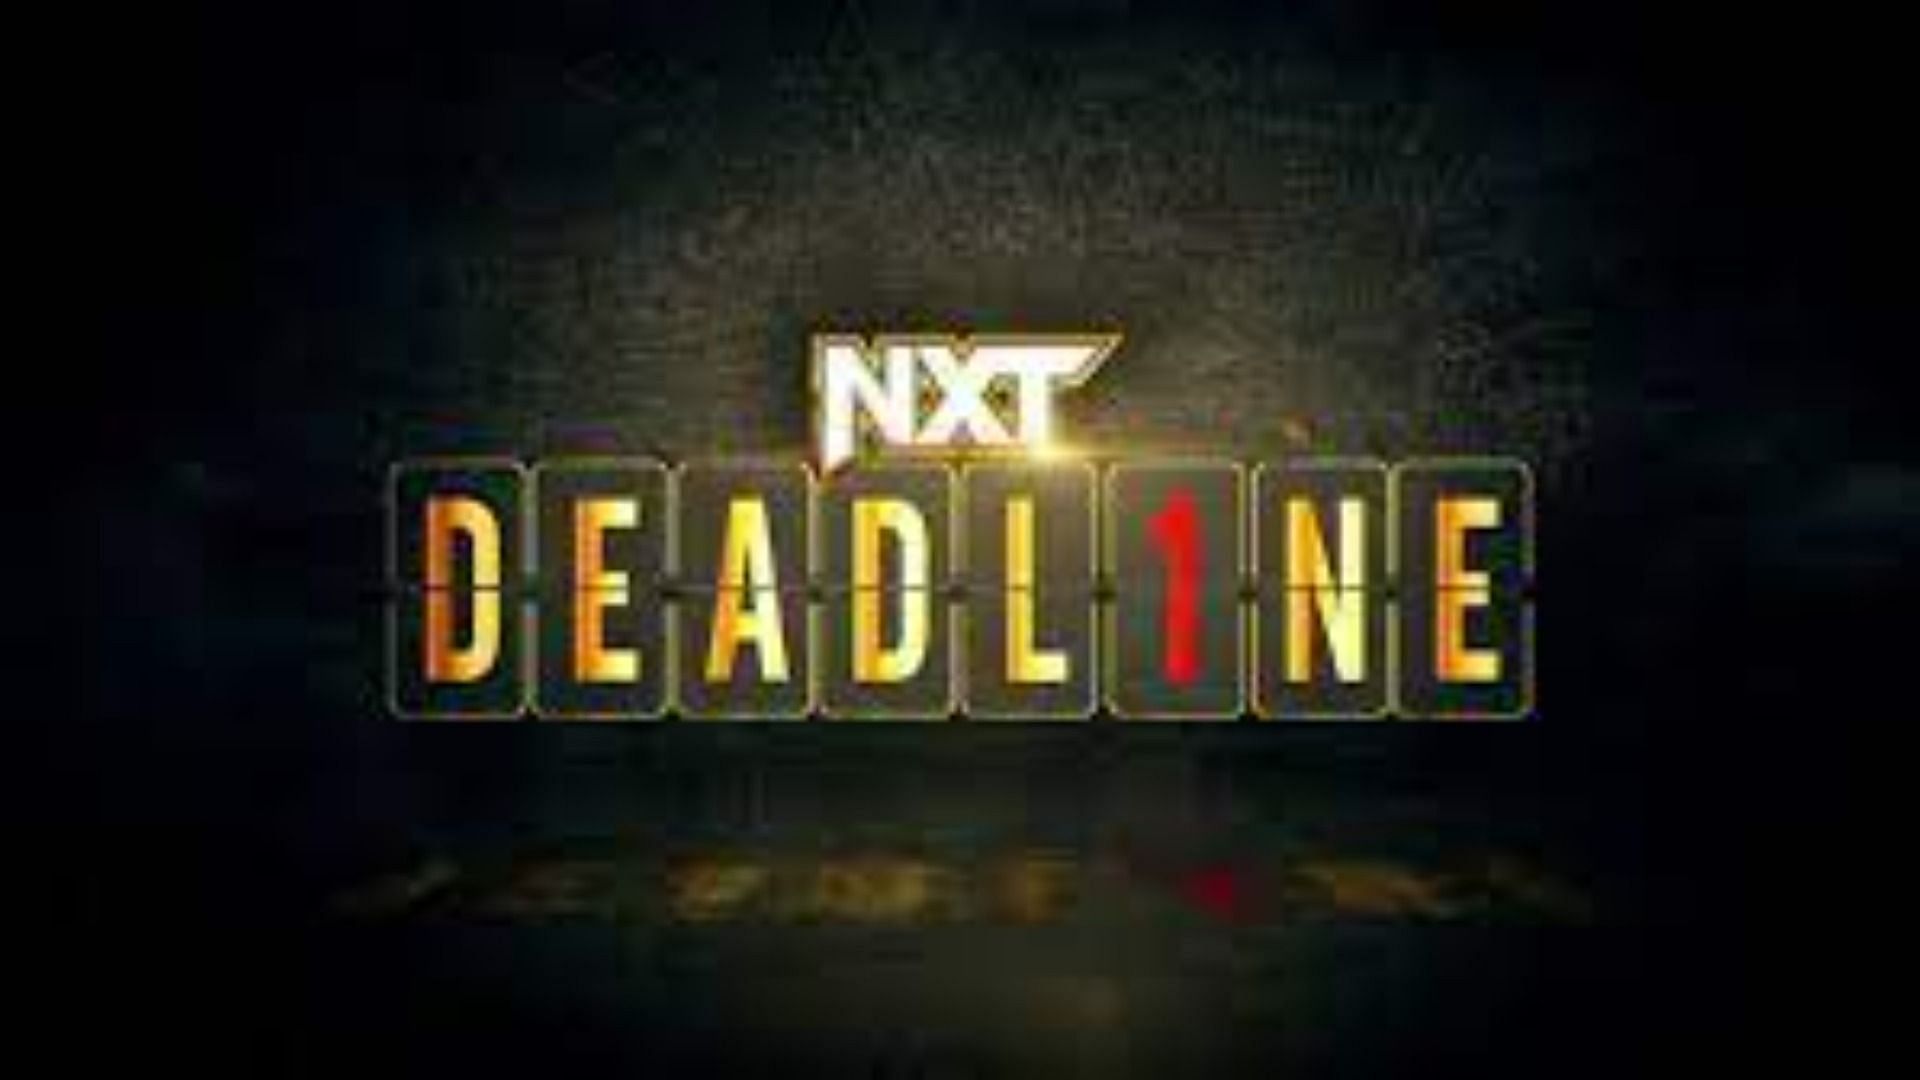 NXT Deadline takes place on December 10, 2022.